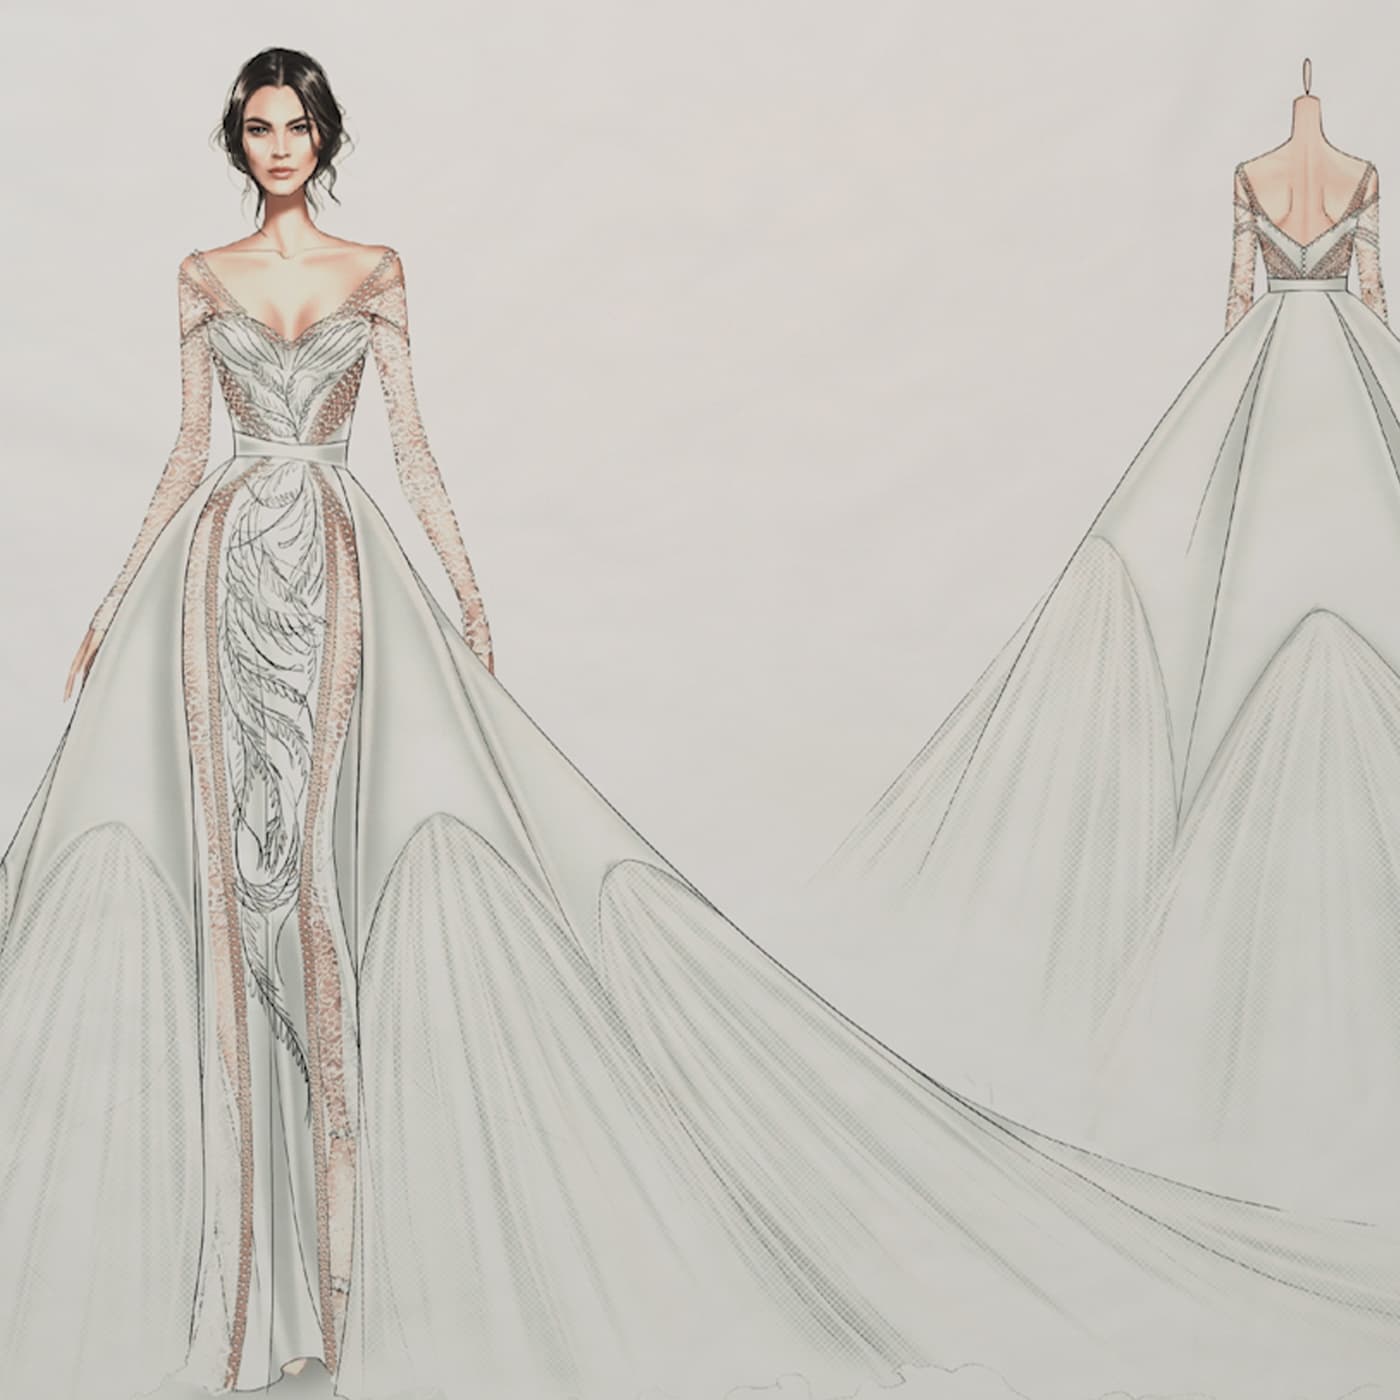 Bridal Couture Sketch